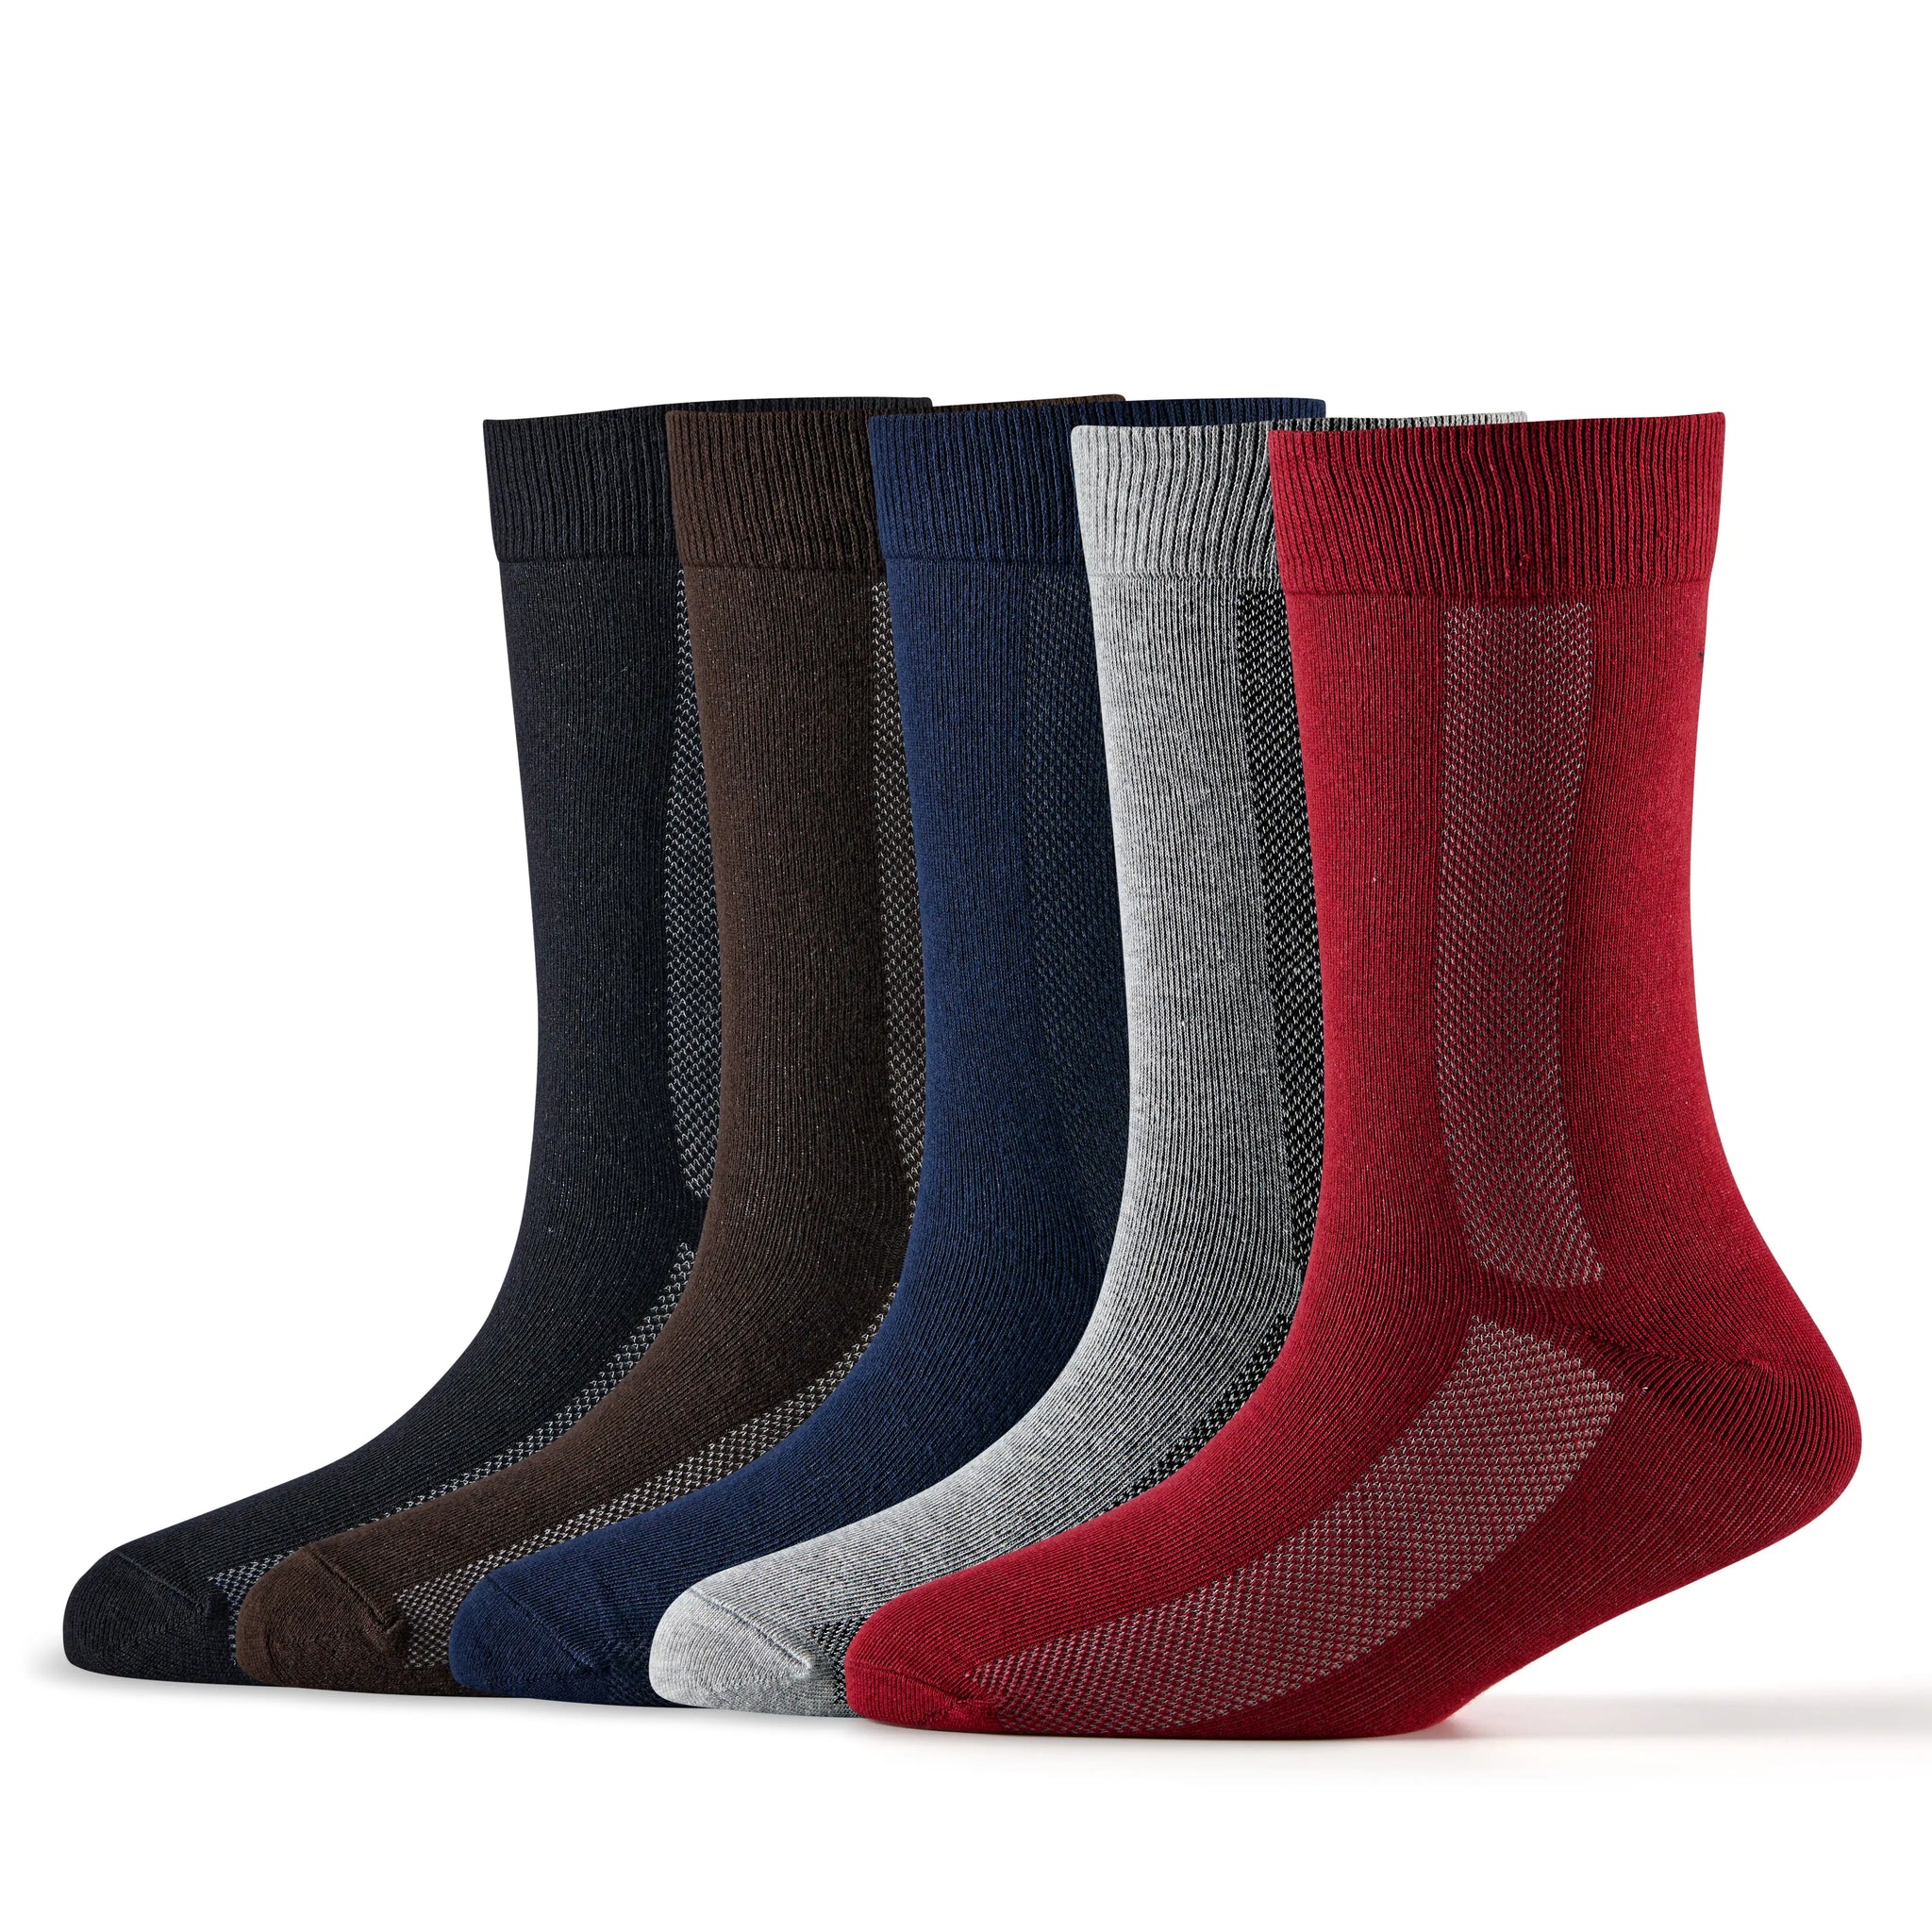 Young Wings Men's_Socks Multi Colour Cotton Fabric Design Free Size Low Ankle Length Casual & Formal Wear Socks - Pack of 5, Style no. 1713-M1